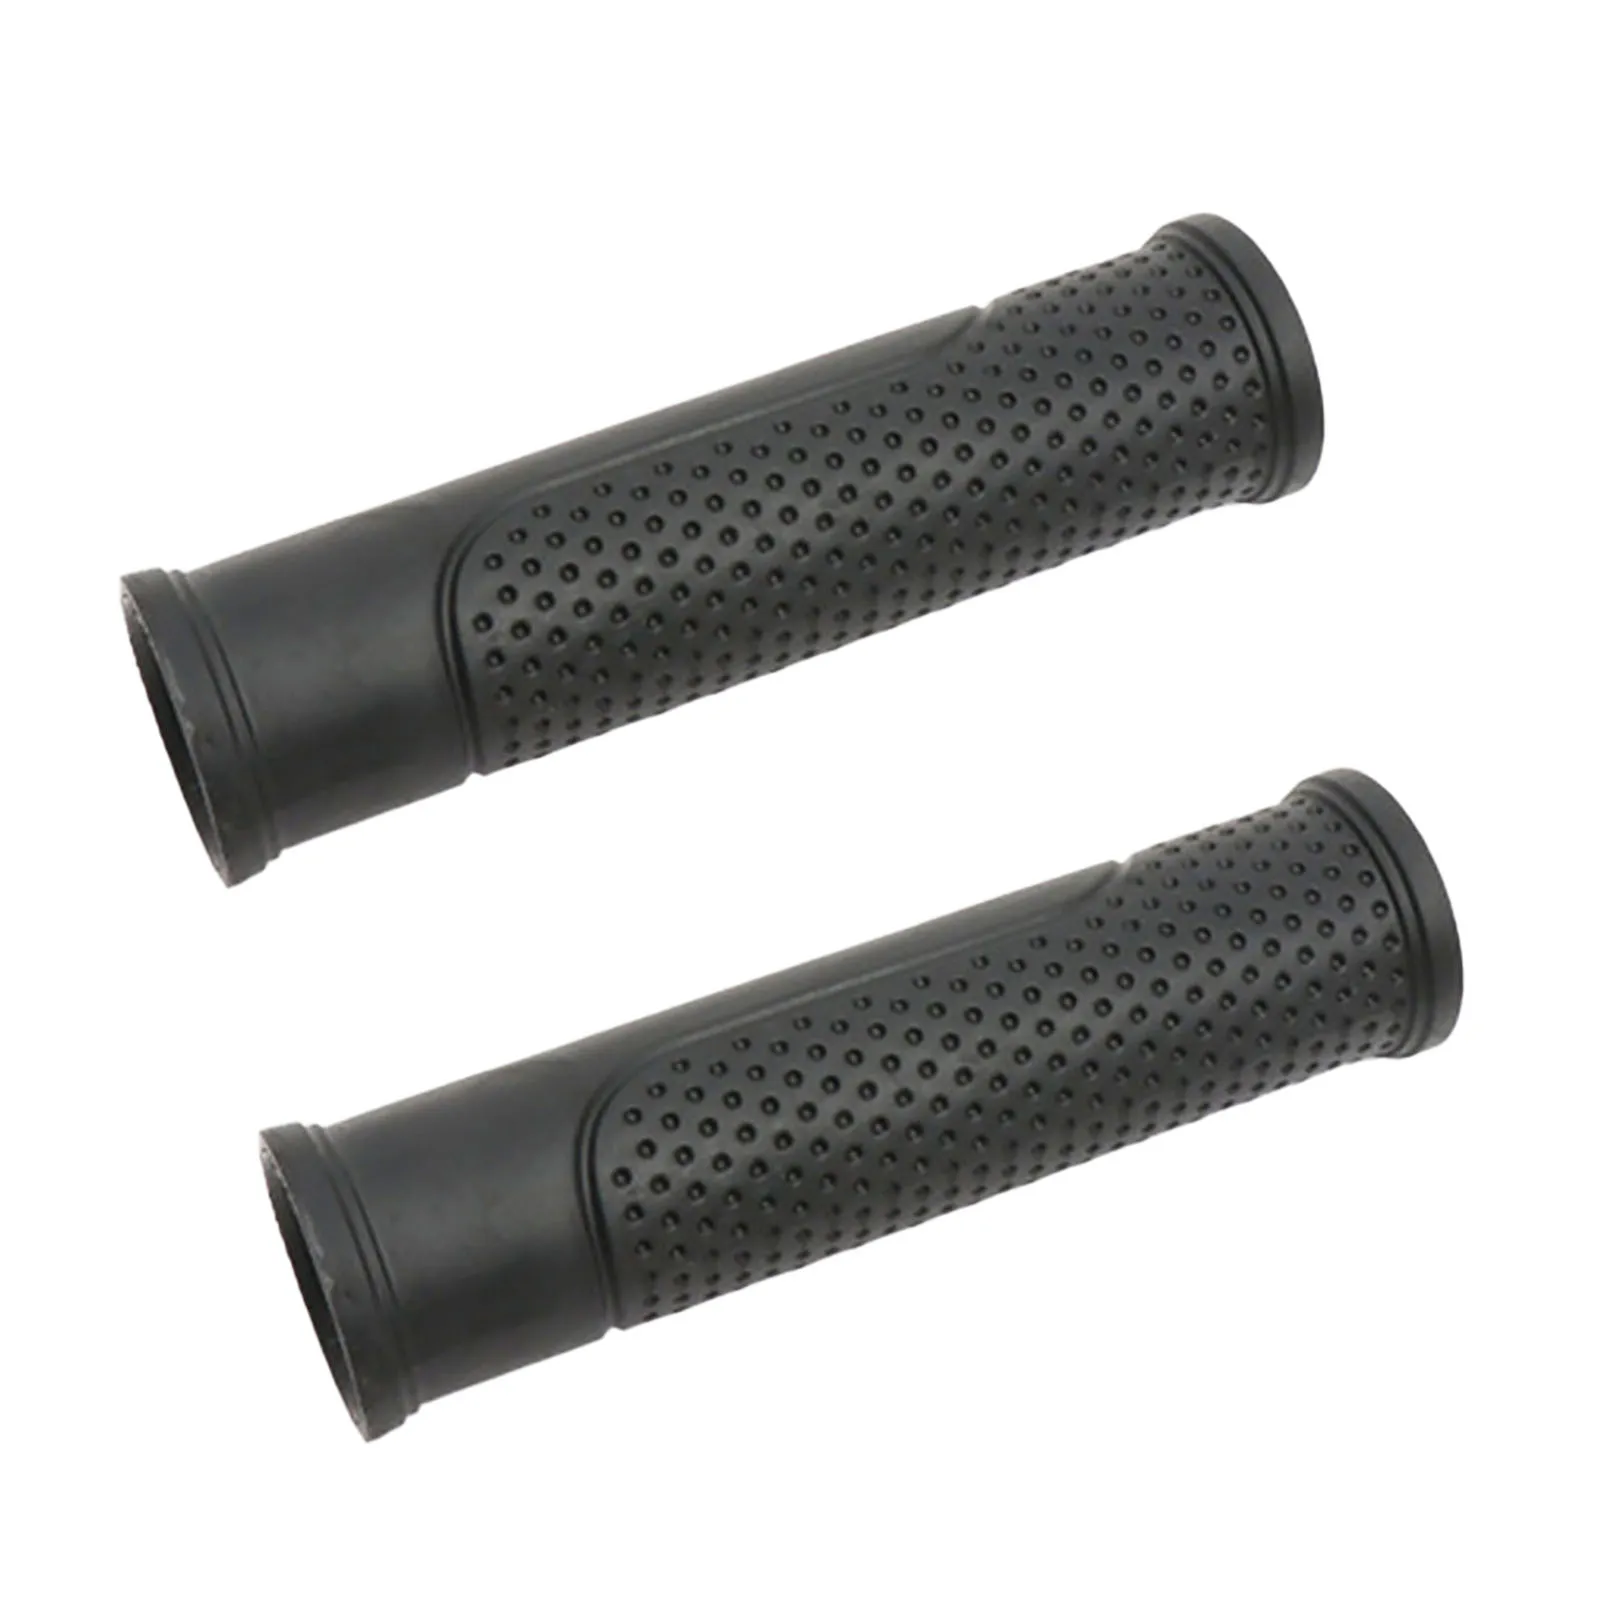 

2pcs 30mm Canoe Kayak Paddles Handle Covers TPE Anti-skid Paddle Grips Non-slip Sleeve Replace Kayaking Boat Accessories